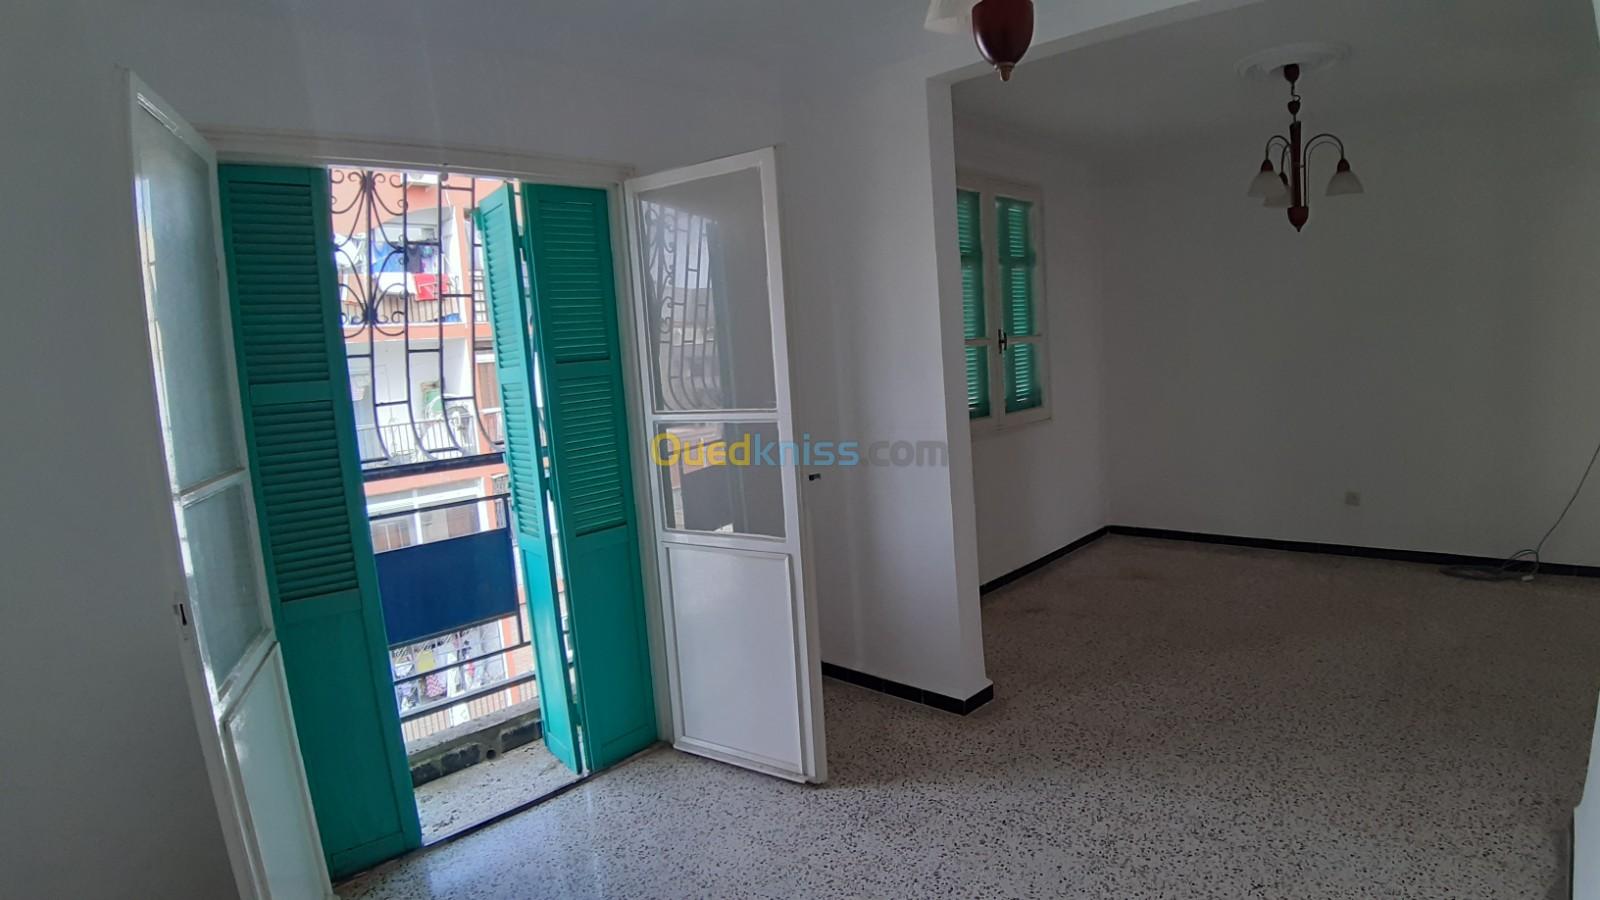 Vente Appartement F3 Alger Ouled fayet